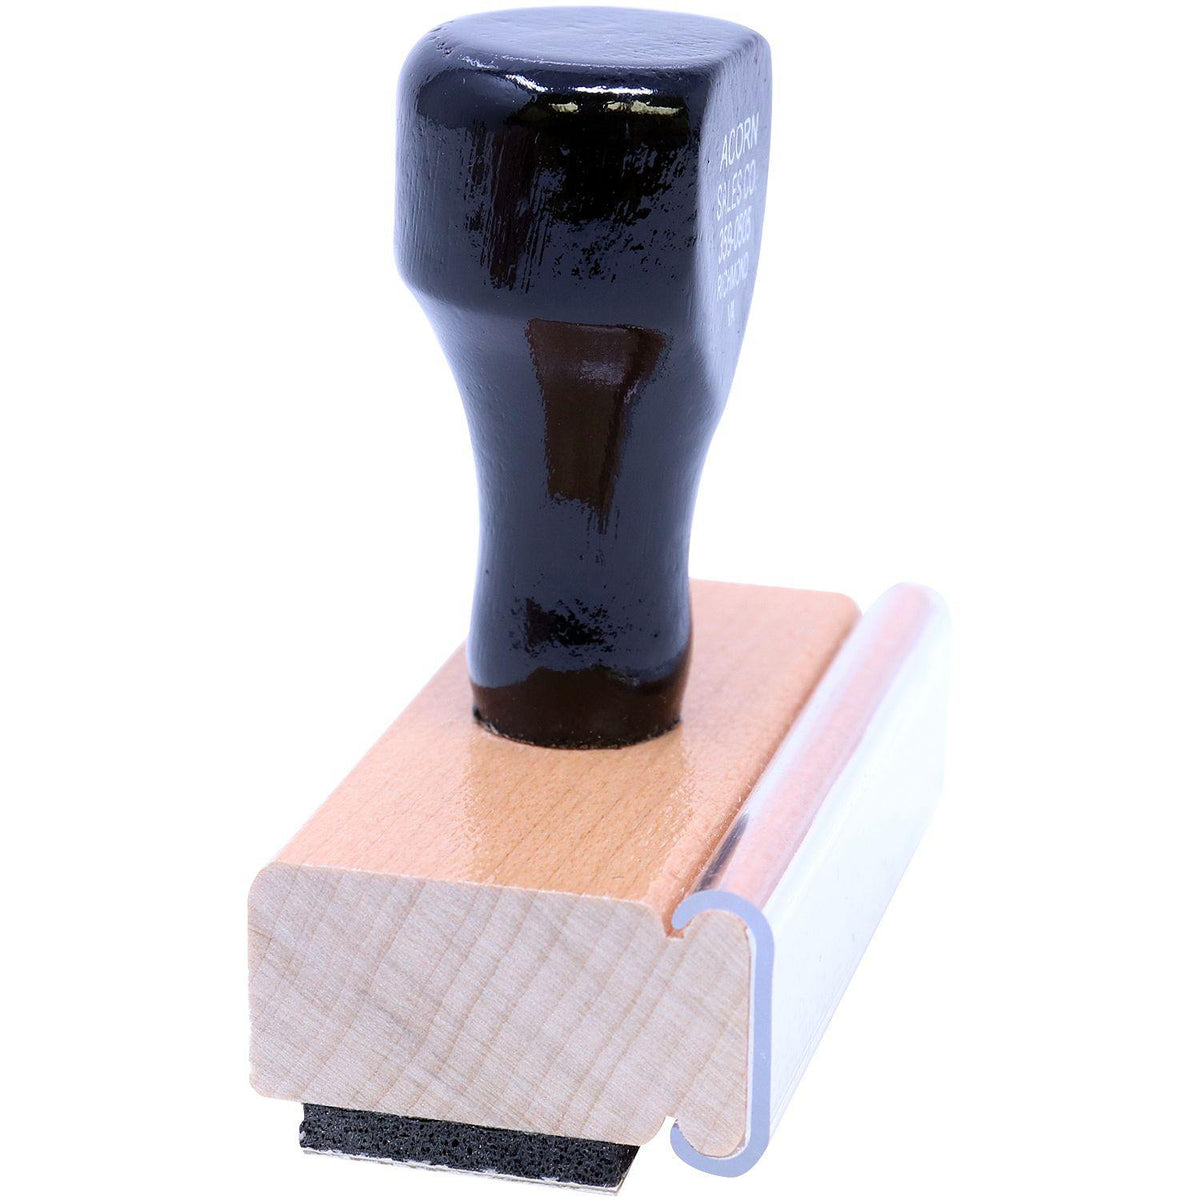 Narrow For Deposit Only Rubber Stamp - Engineer Seal Stamps - Brand_Acorn, Impression Size_Small, Stamp Type_Regular Stamp, Type of Use_Business, Type of Use_Finance, Type of Use_Office